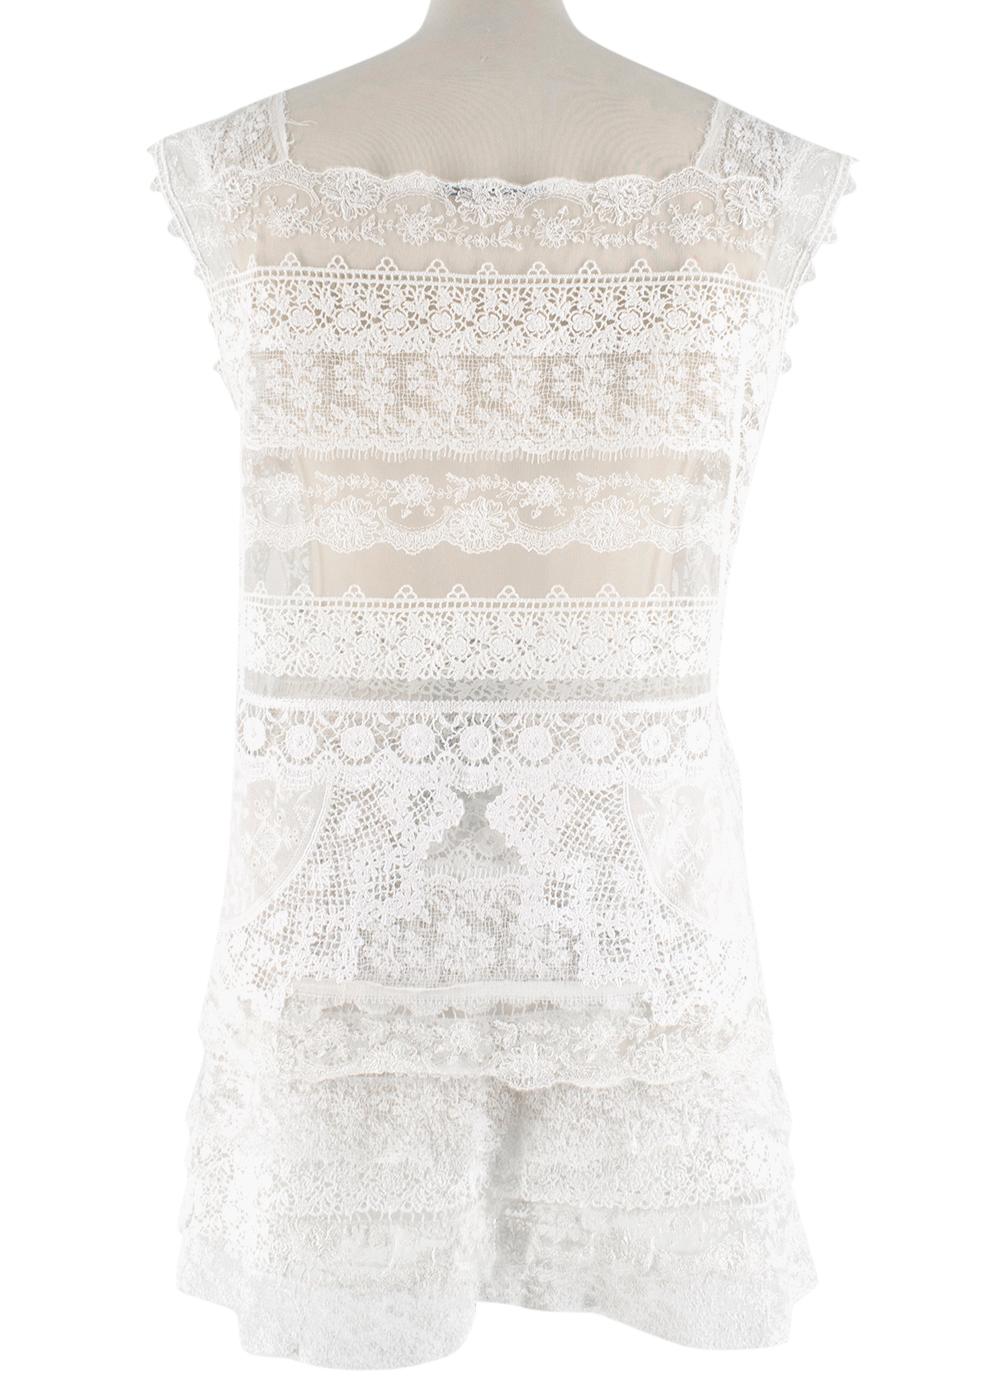 Ermanno Scervino Cream Lace Mini Skirt and Top Set - Size US 4-6 For Sale 1